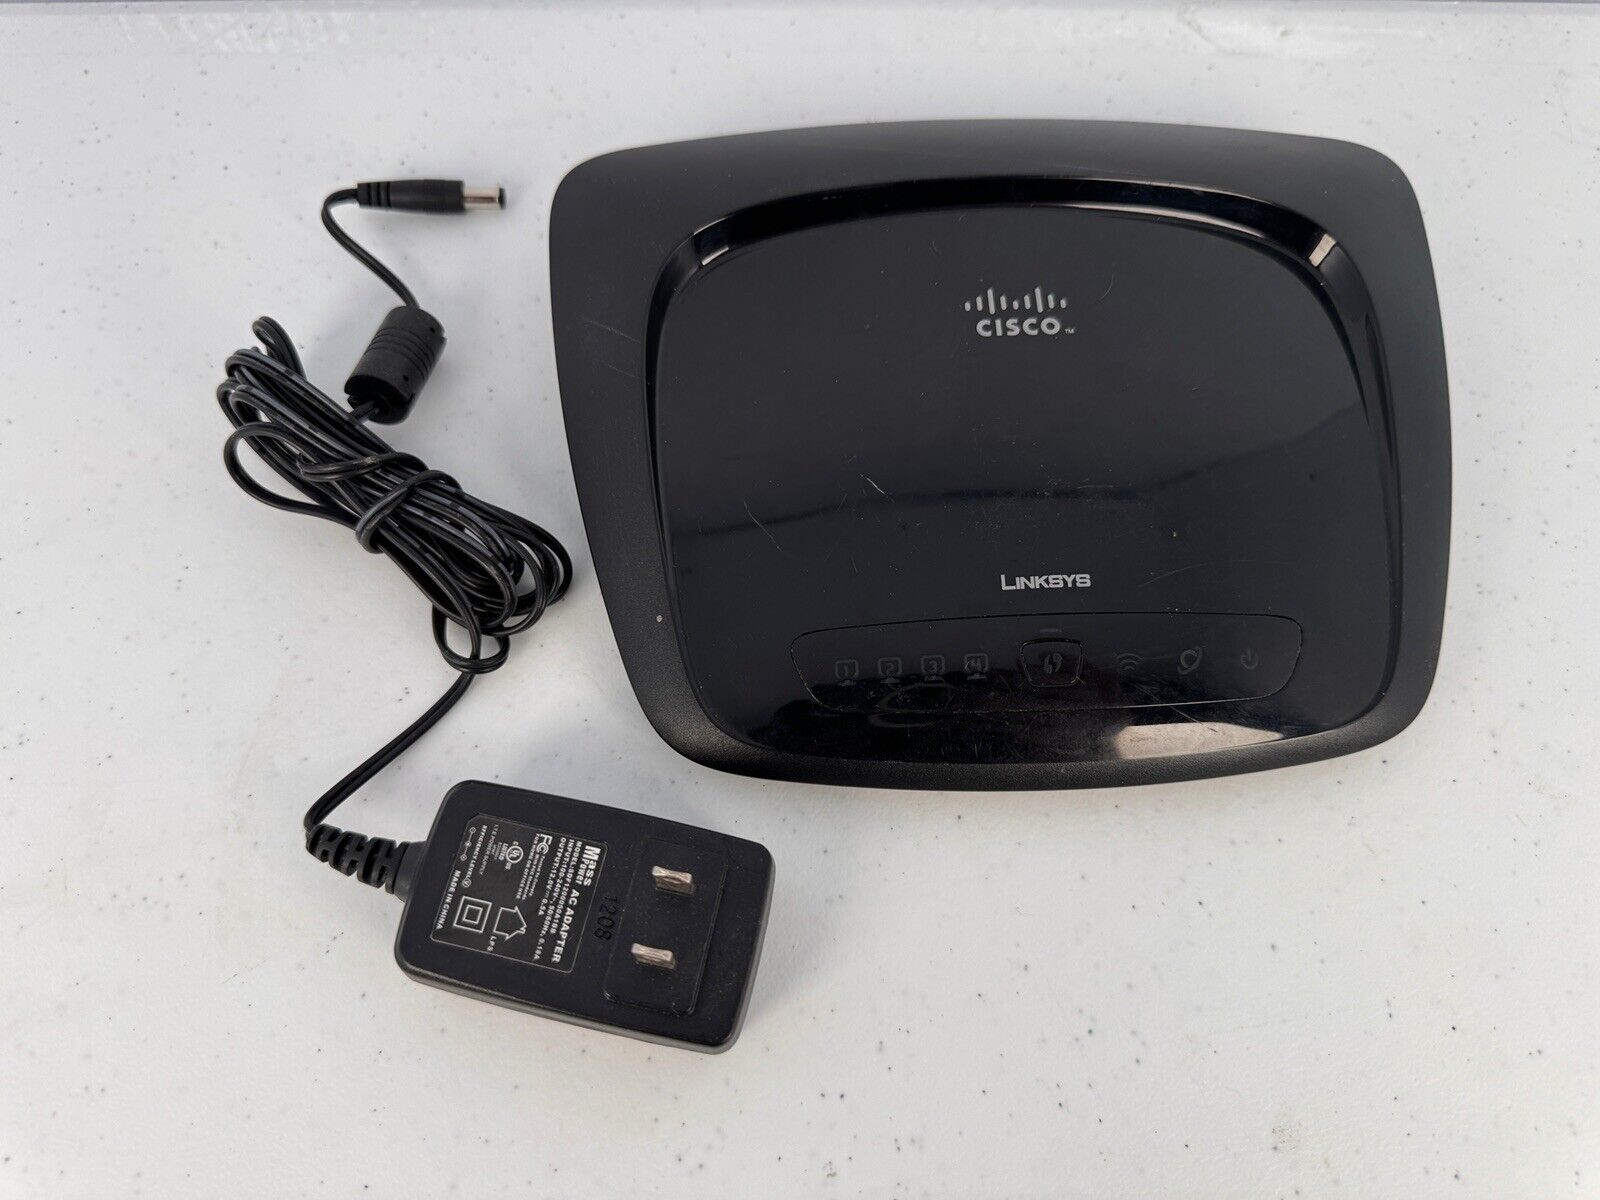 Linksys by Cisco Wireless-N Home Router Model WRT120N 4-Port 10/100 Ethernet